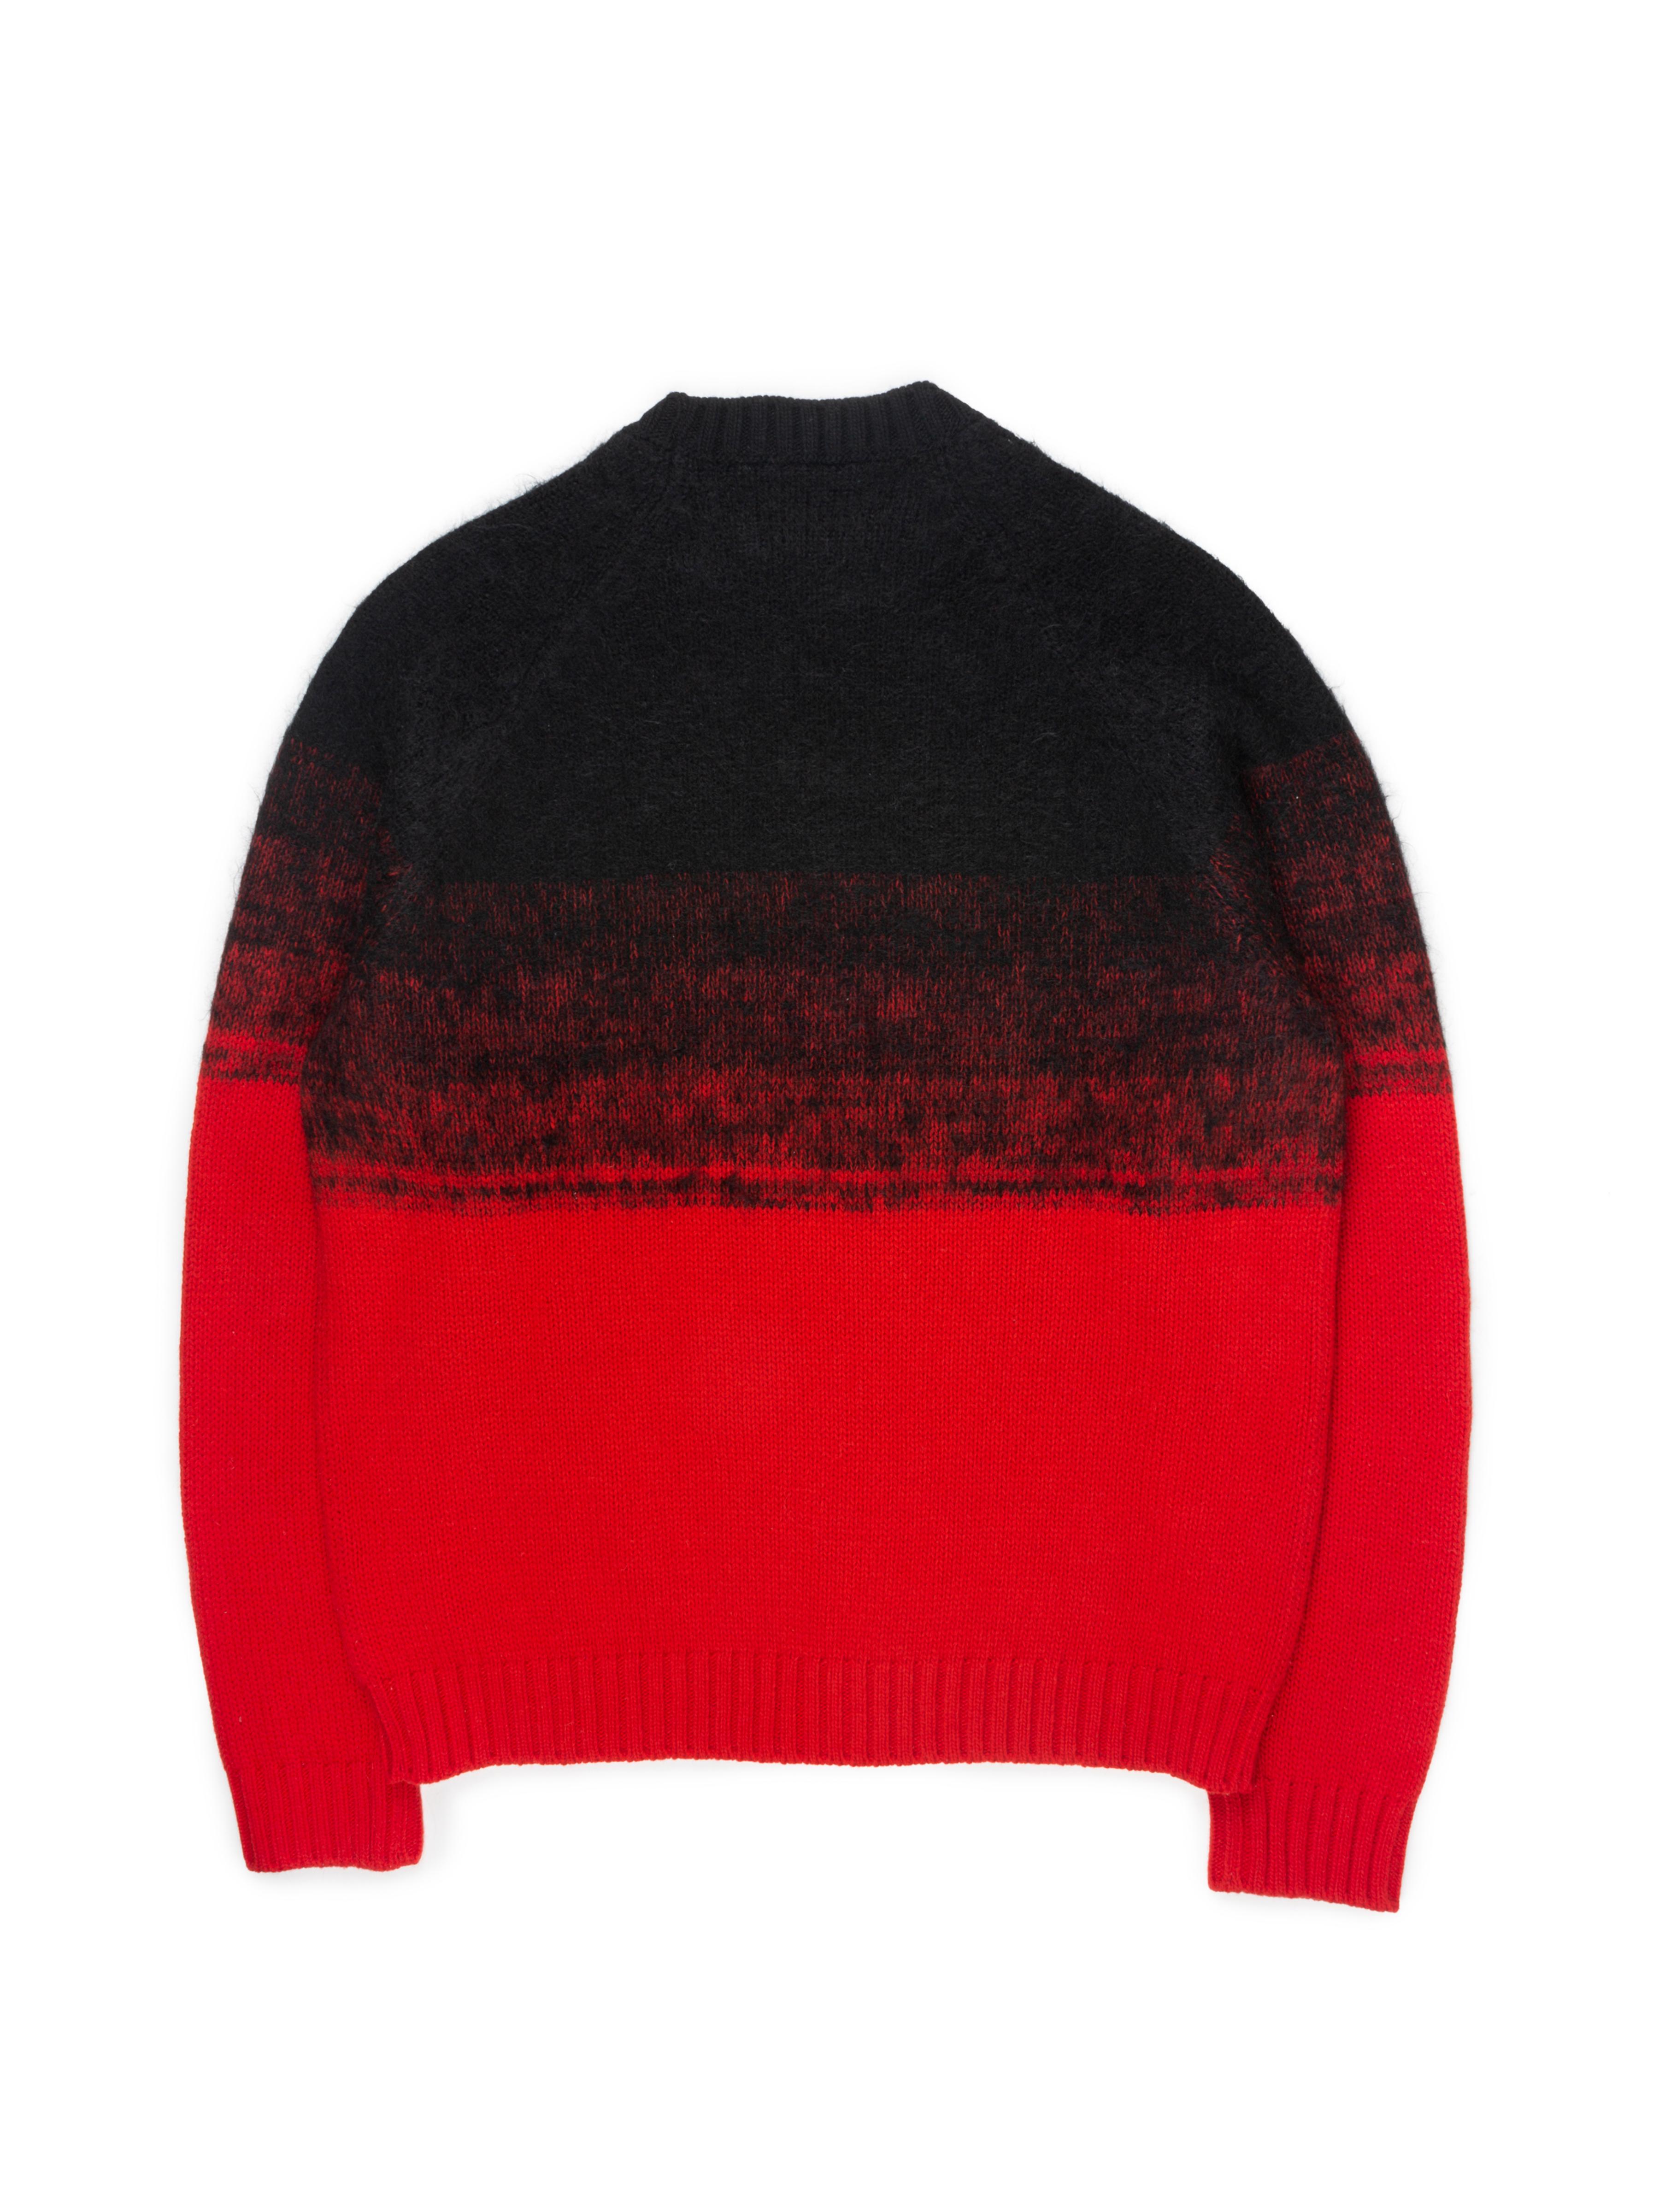 black green red sweater